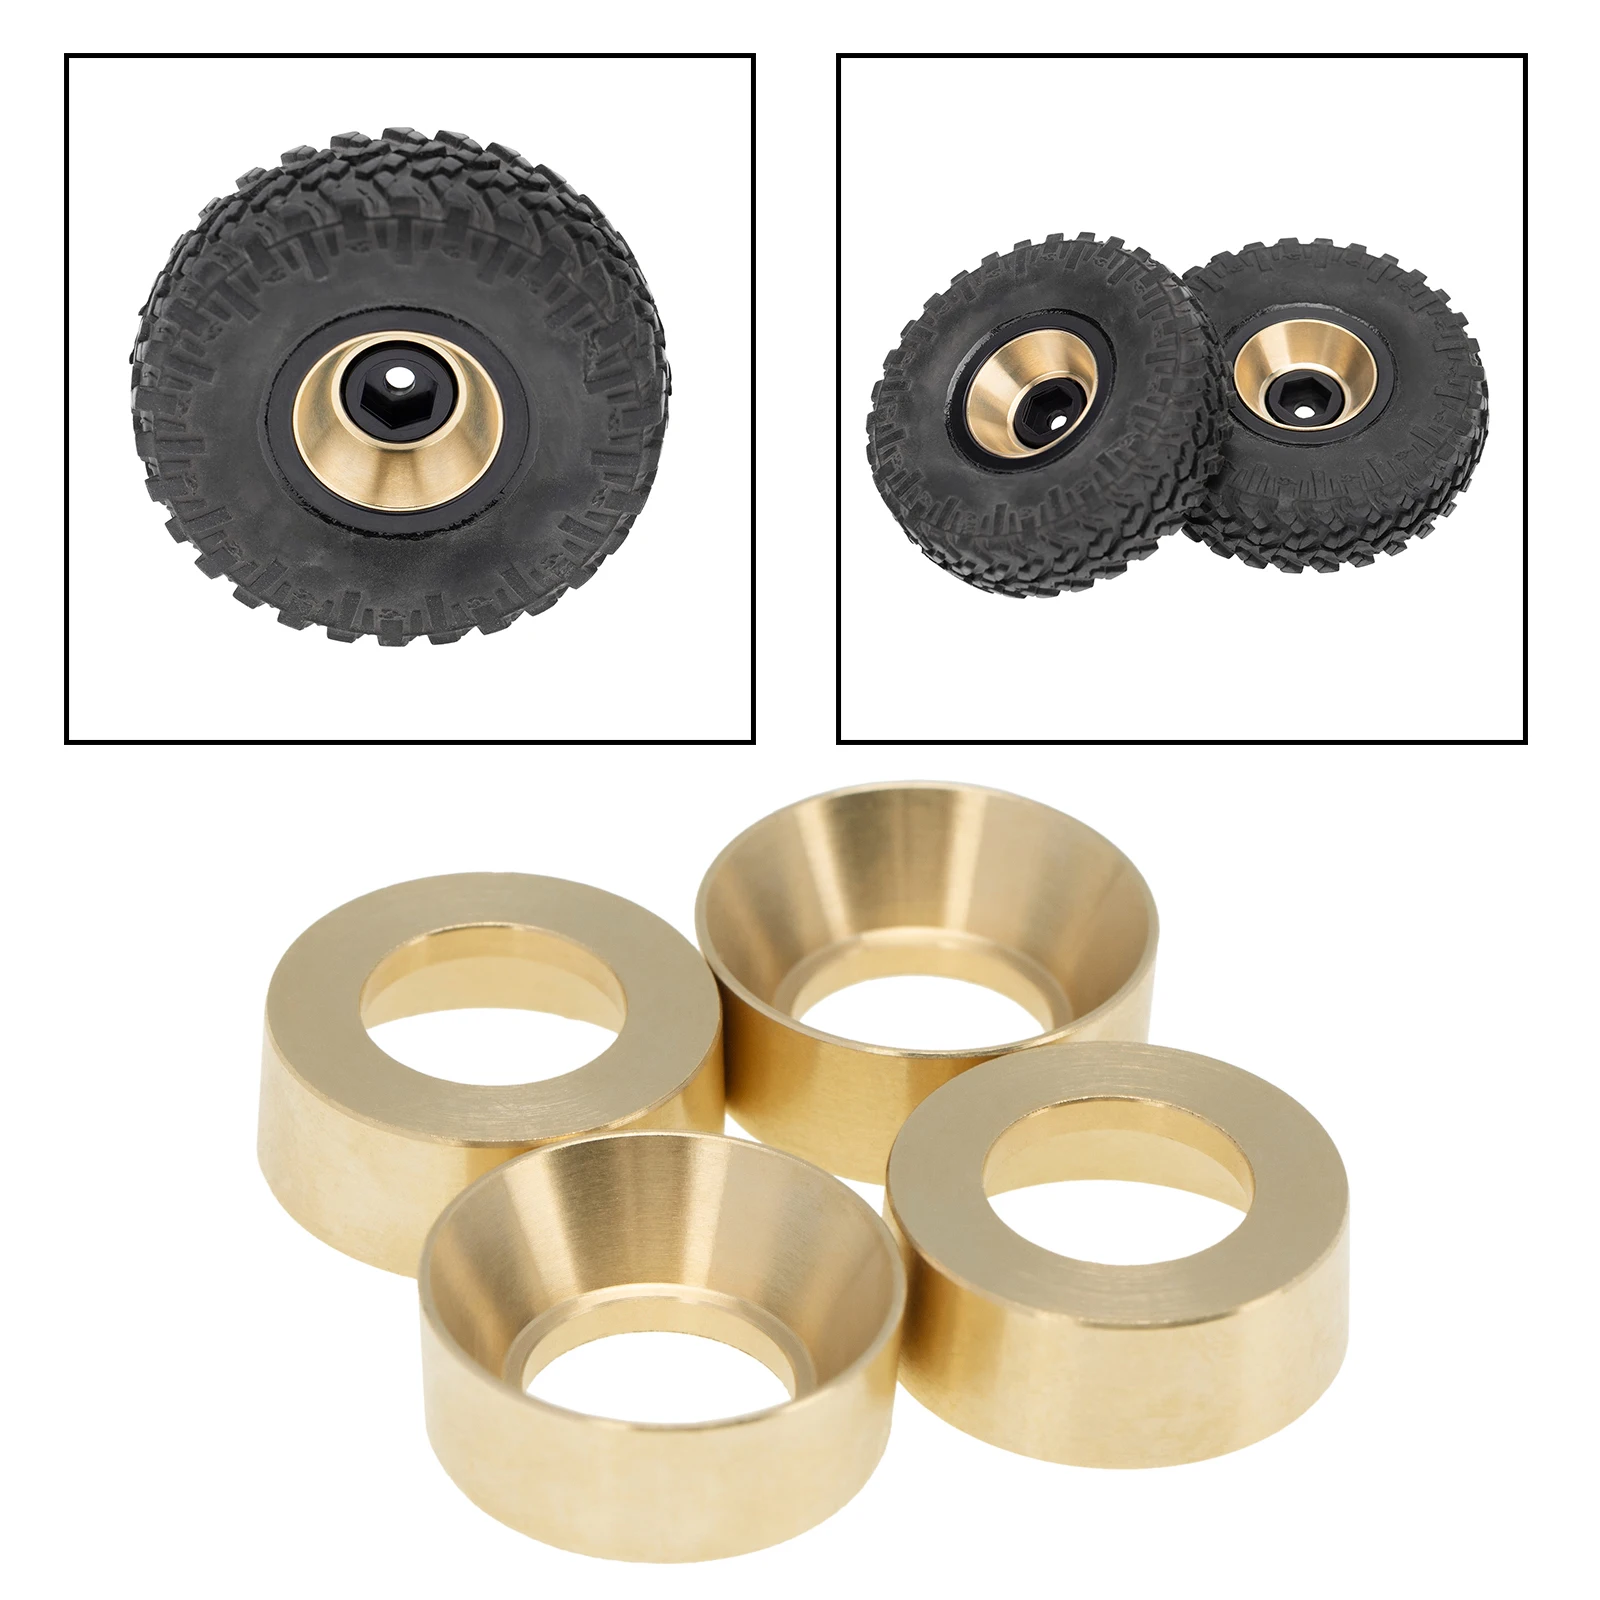 ZeckTeck RC Car Brass Wheel Weights Counterweight for 1/24 Axial SCX24 90081 AXI00002 AXI0000 AXI90081 RC Car Upgrade Parts 4pcs 